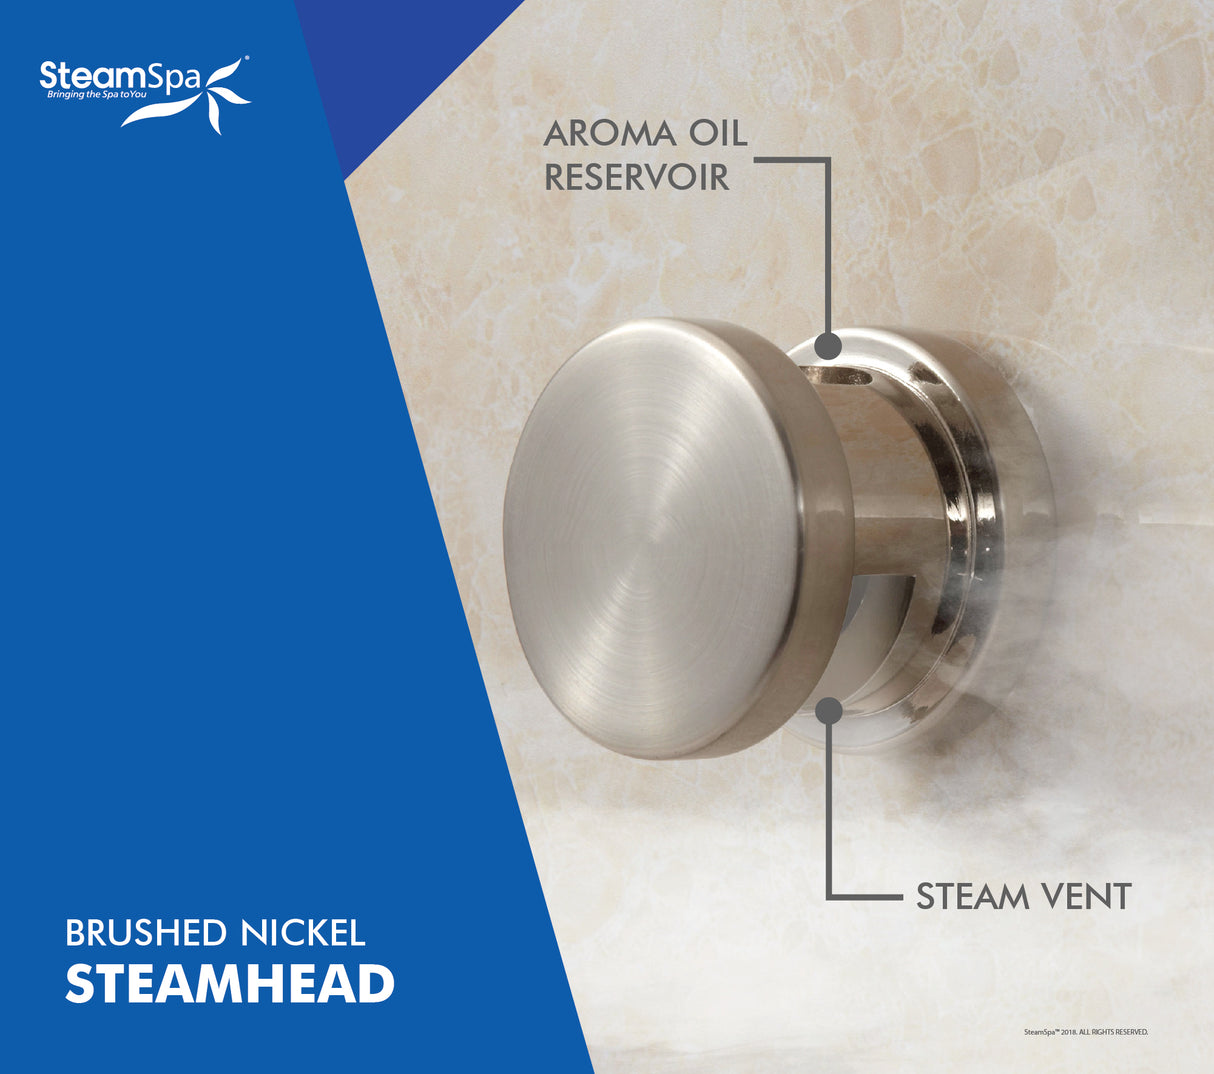 SteamSpa Executive 4.5 KW QuickStart Acu-Steam Bath Generator Package with Built-in Auto Drain in Brushed Nickel EXR450BN-A